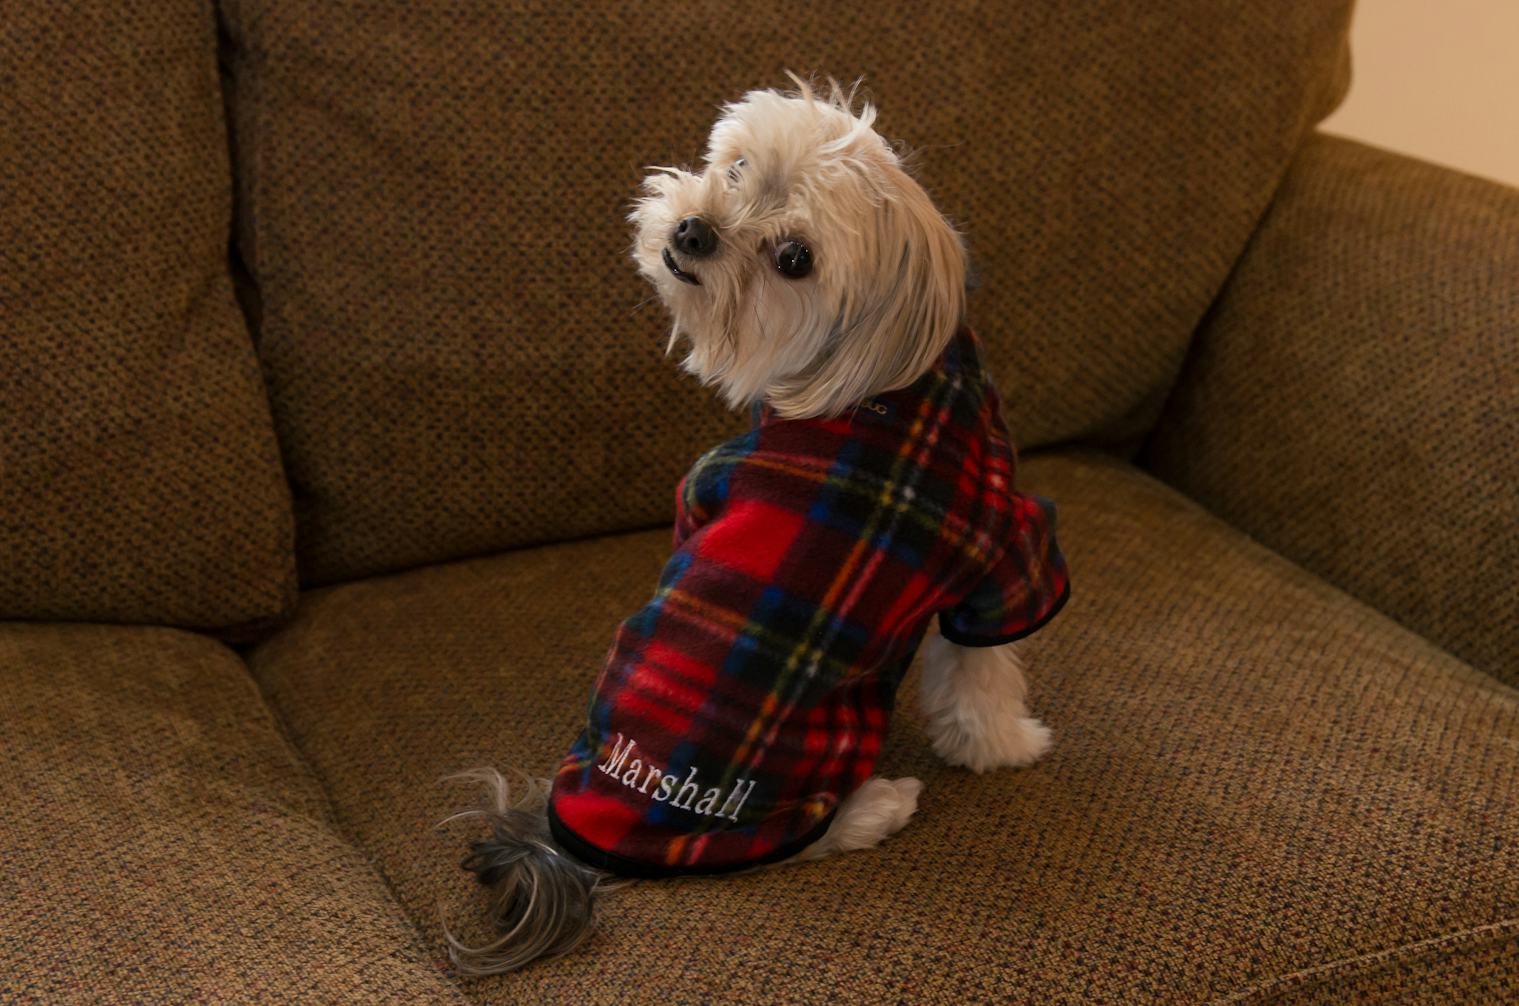 11 Matching Dog & Owner Pajamas That Are Adorable From Head To Paw — PHOTOS